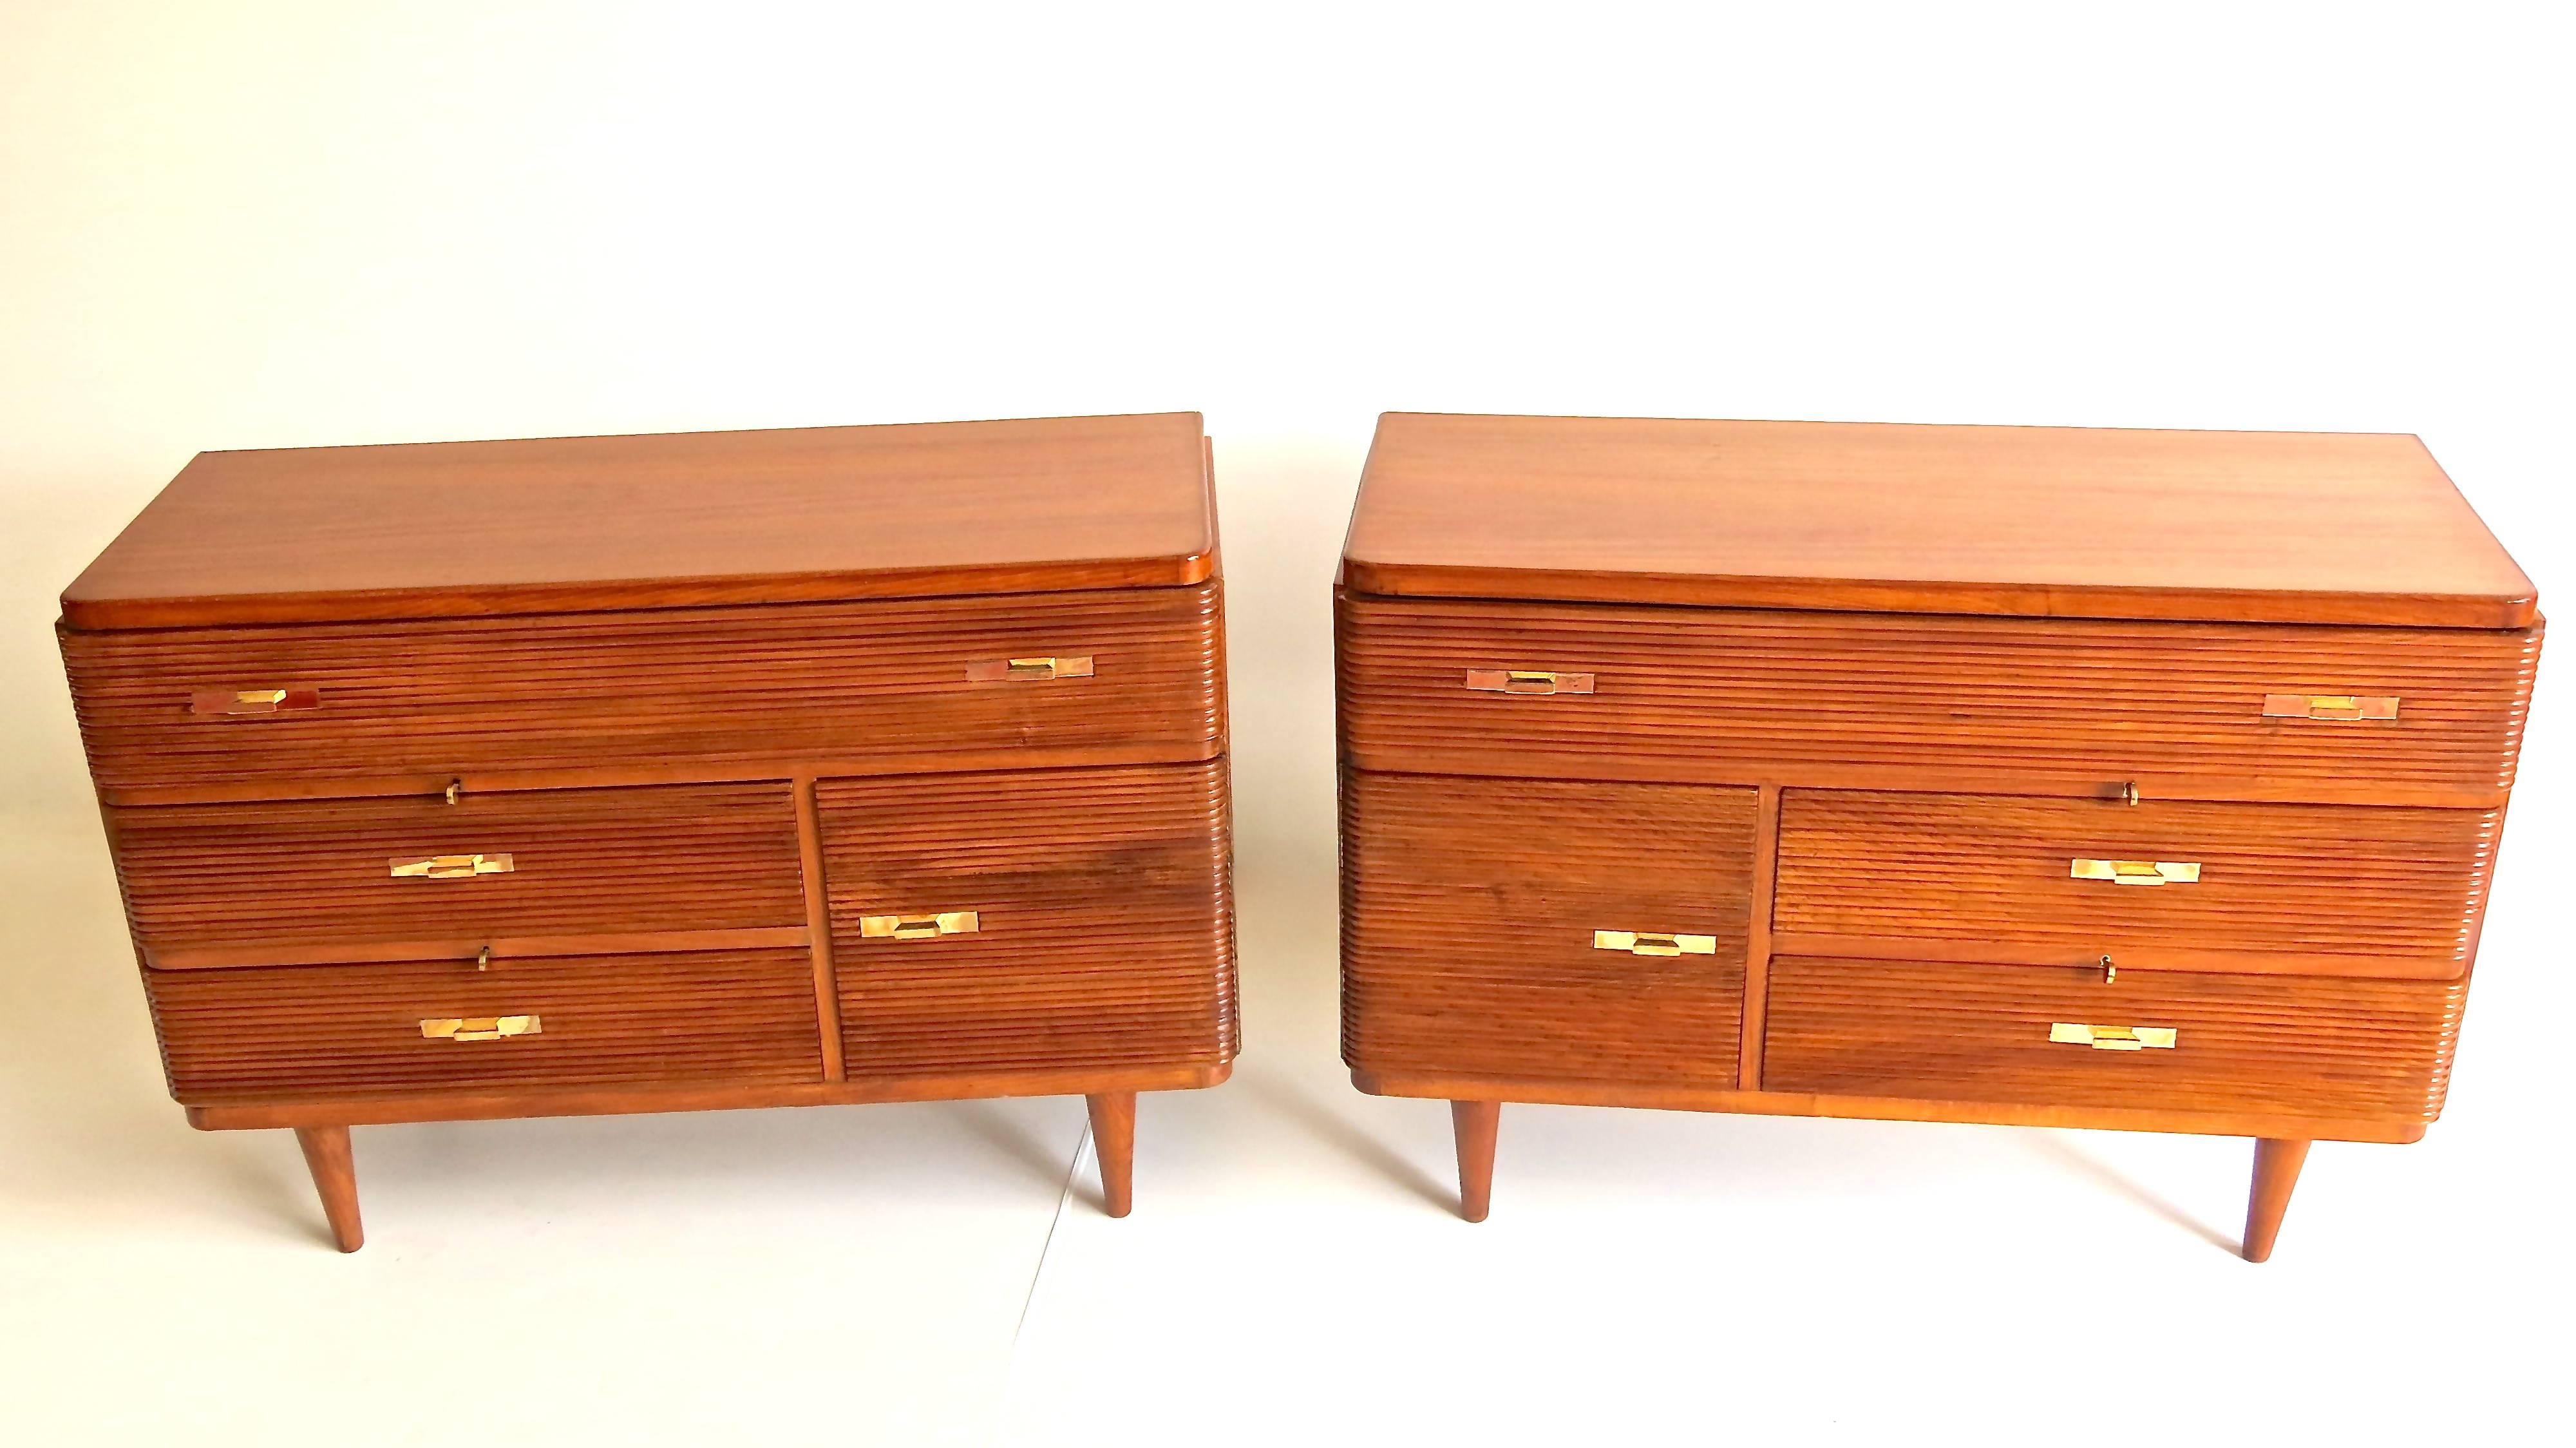 Pair of important and rare cabinets 1940-1941
Designed by Gio Ponti
unique items produced for a private residence in Milano
Three drawers and a door each cabinet
Oak and brass details
Brass handles original cast by Gio Ponti
Two brass key each